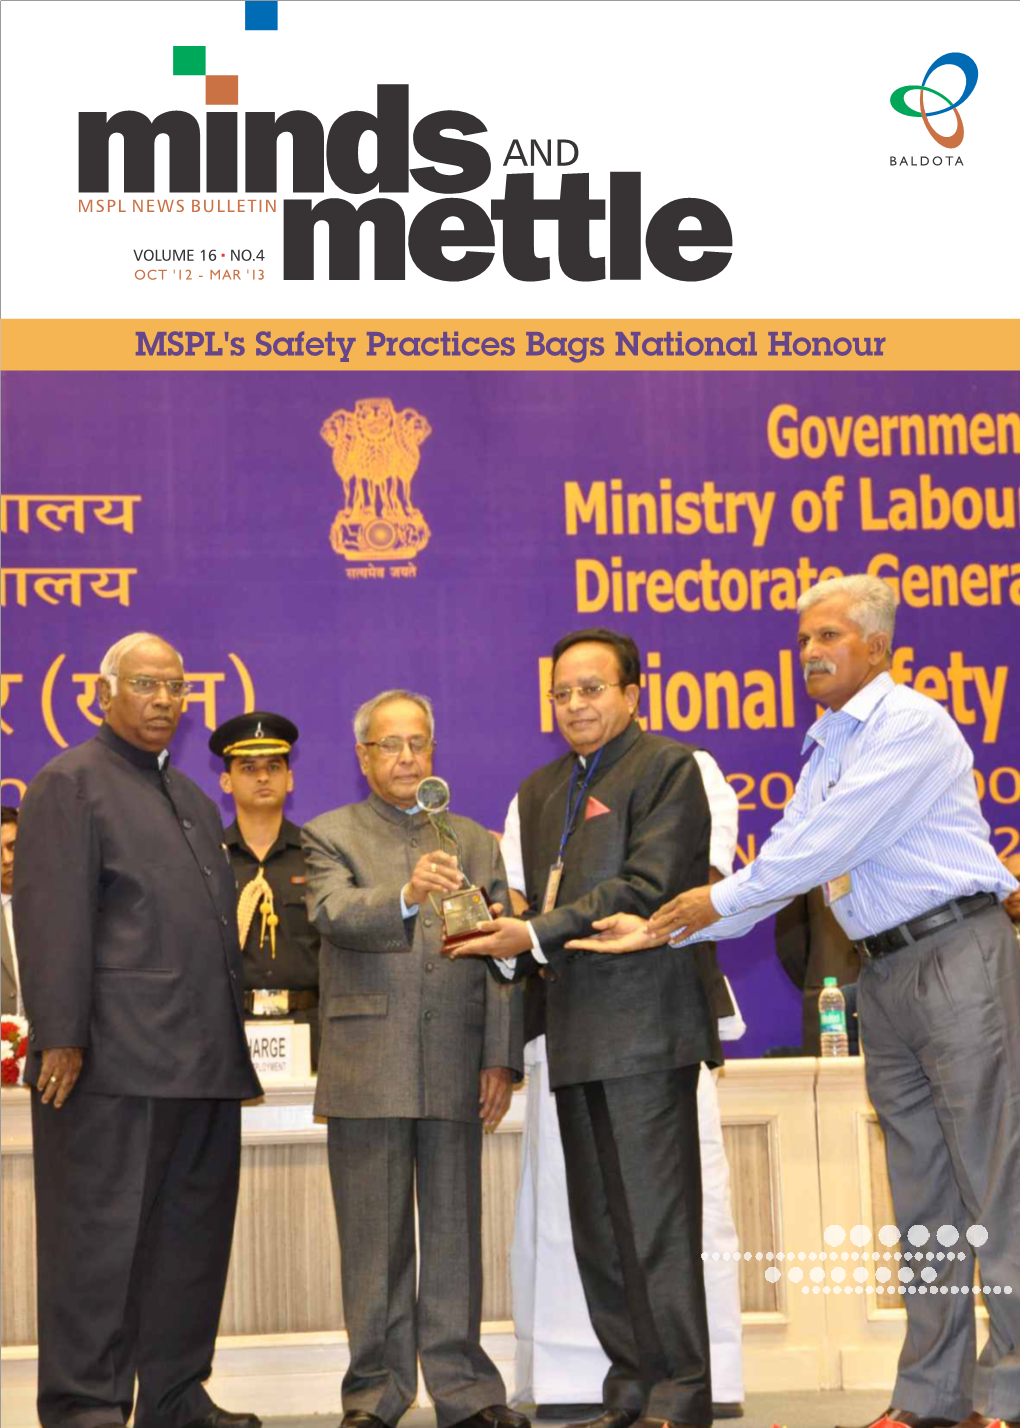 MSPL's Safety Practices Bags National Honour MSPL's Safety Practices Bags National Honour